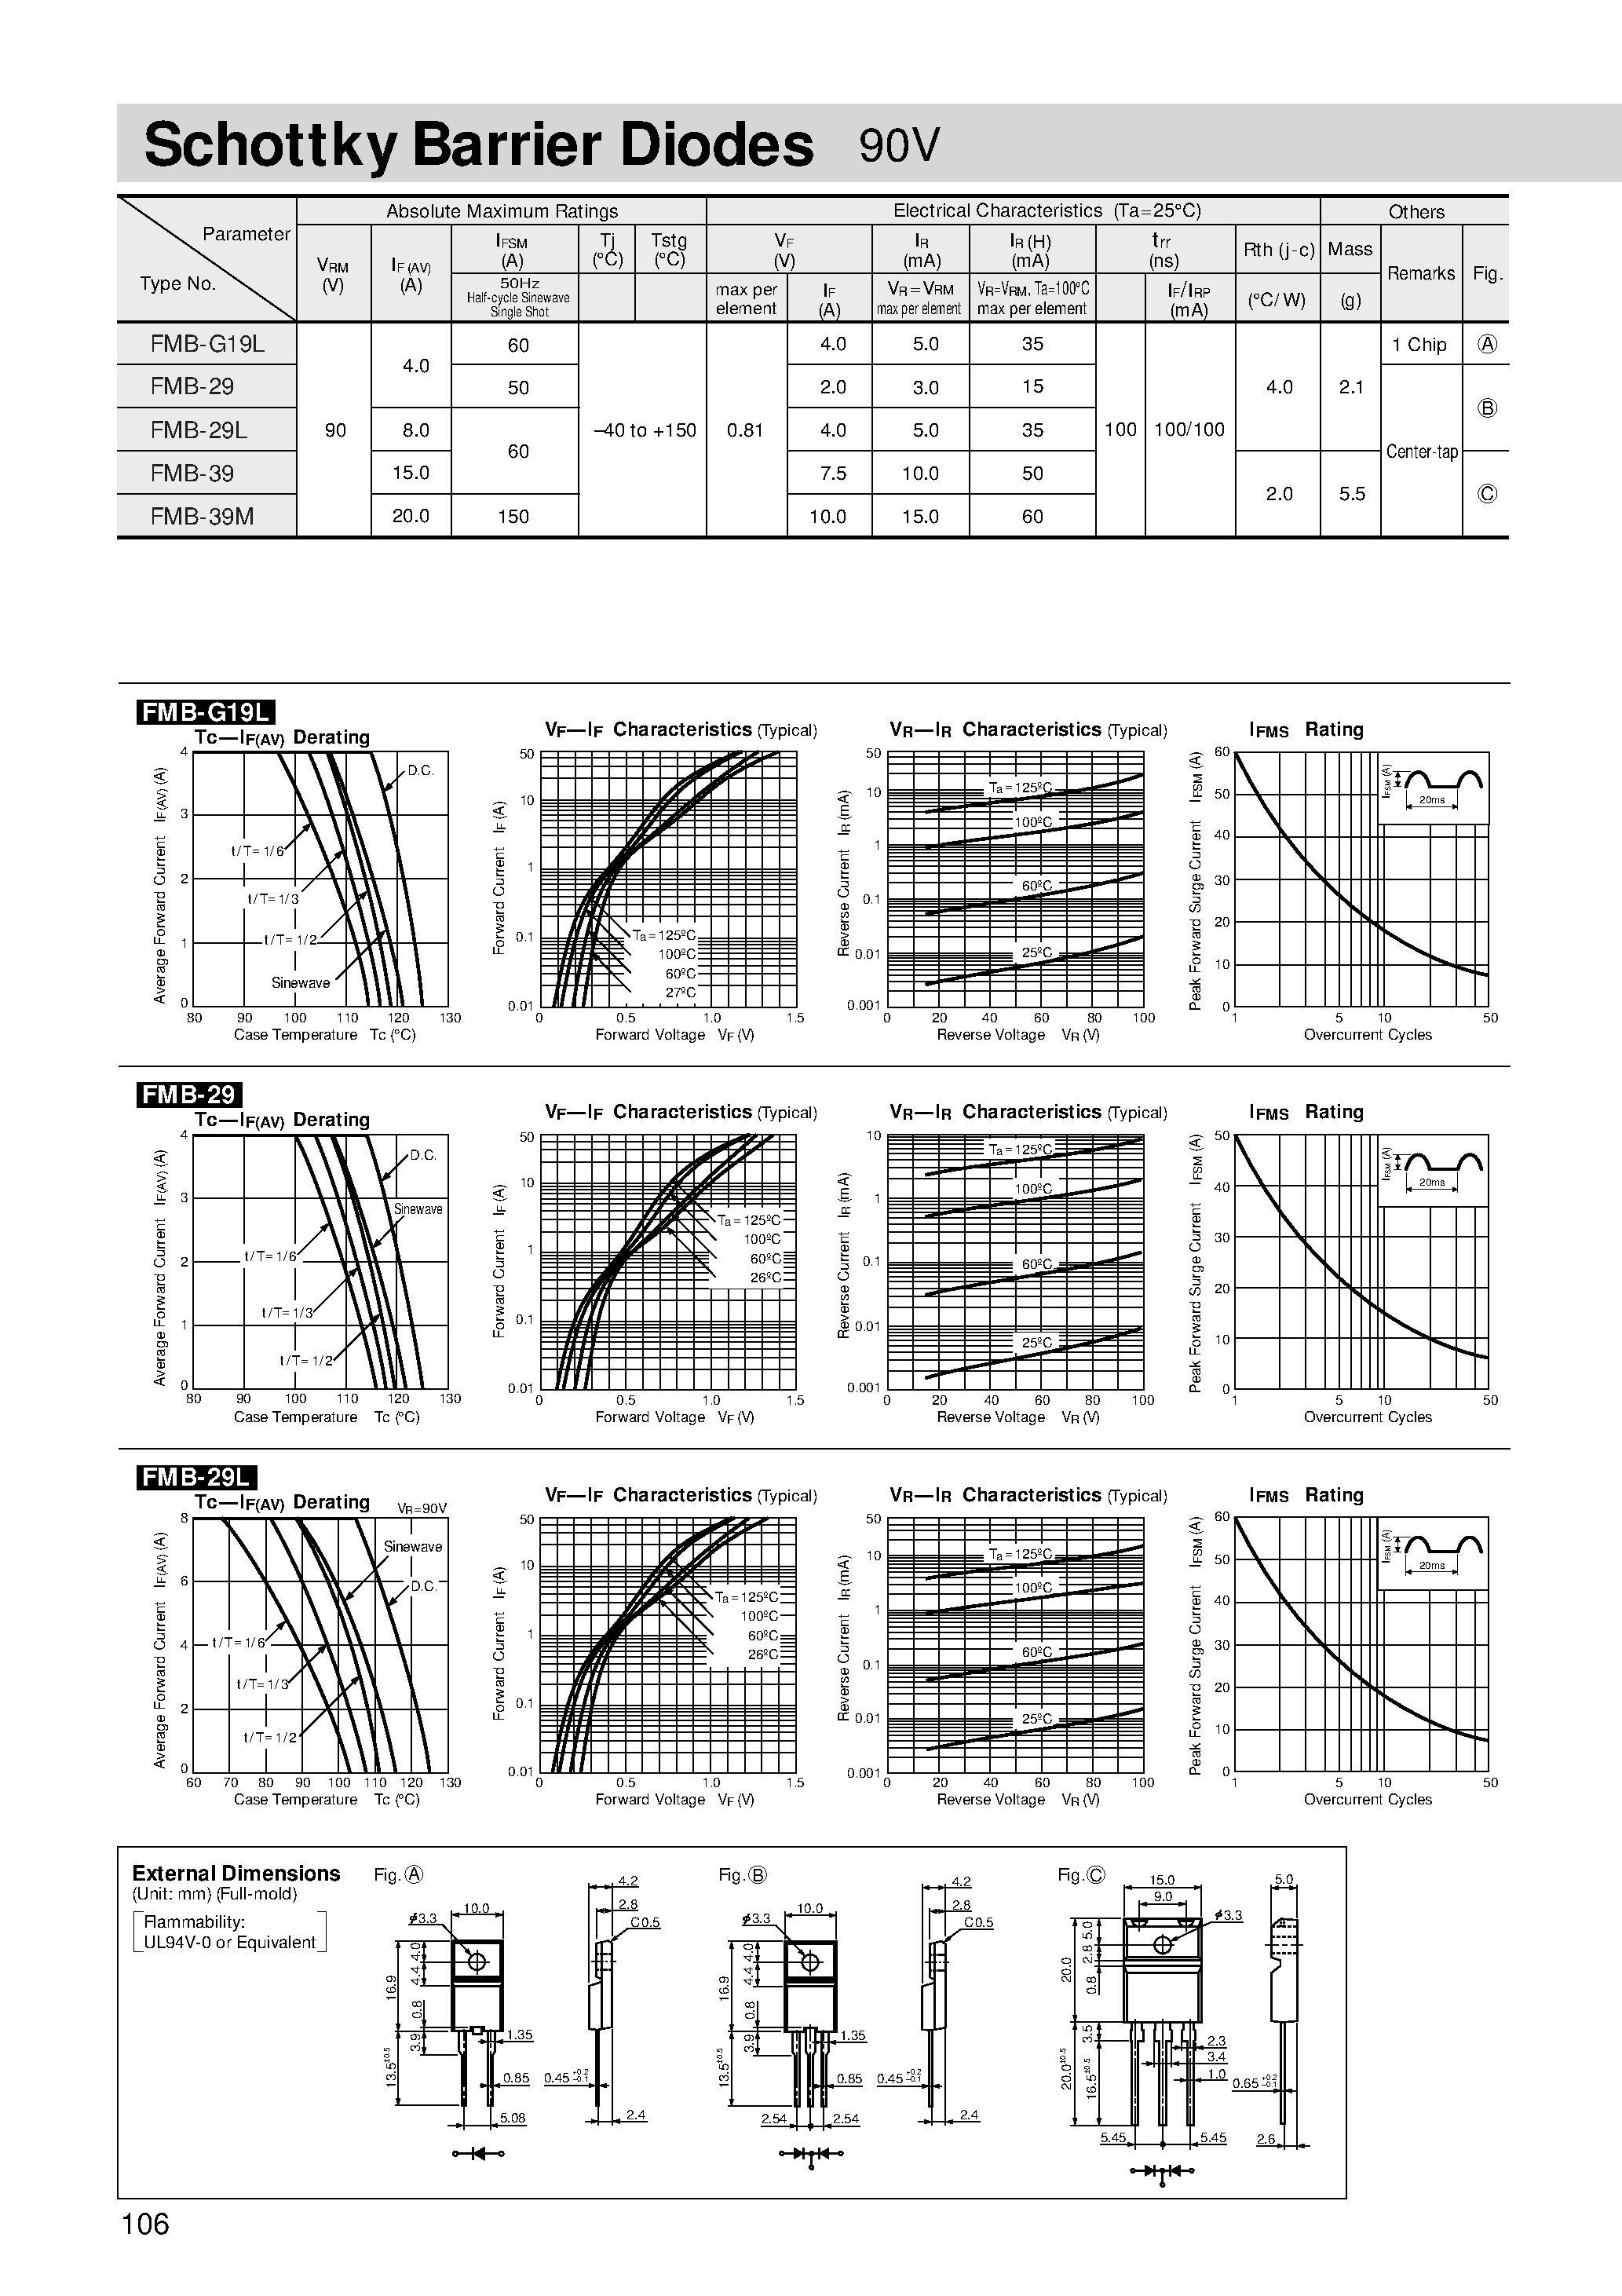 Datasheet FMB-39 - Schottky Barrier Diodes 90V page 1